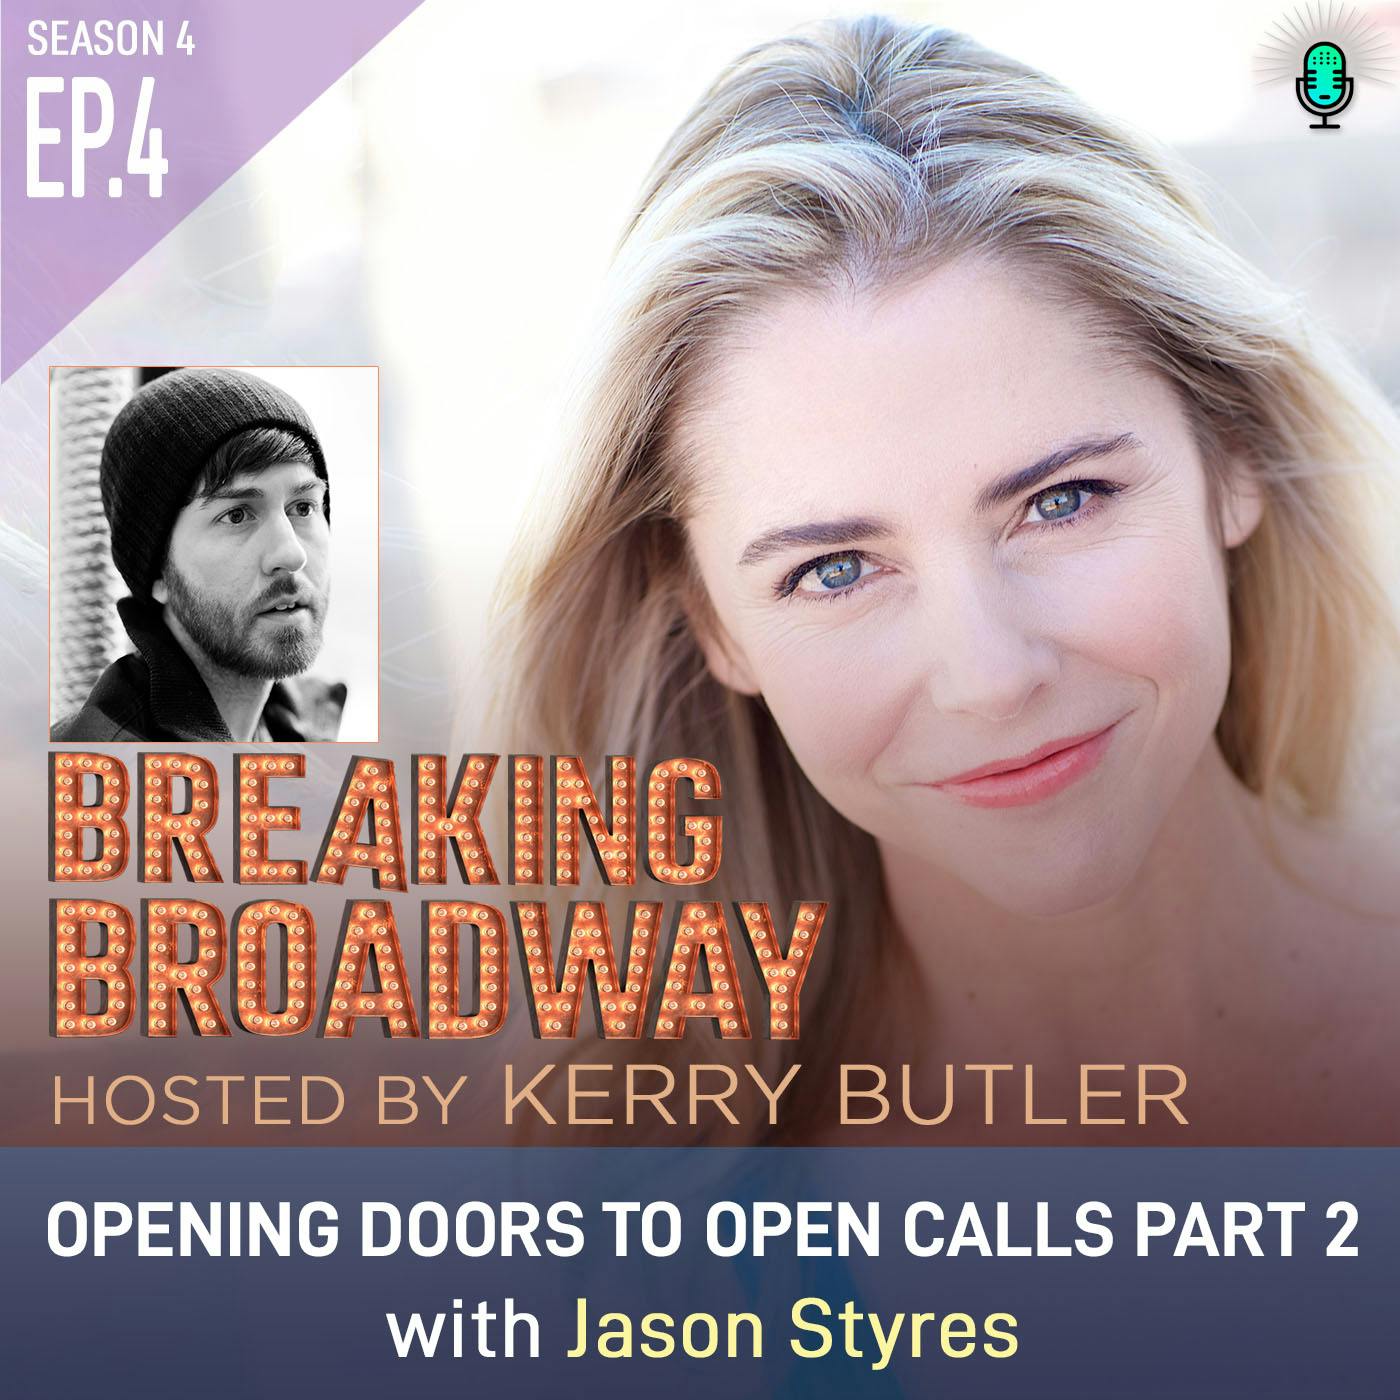 S4 EP4 Opening Doors to Open Calls with Jason Styres - Part 2